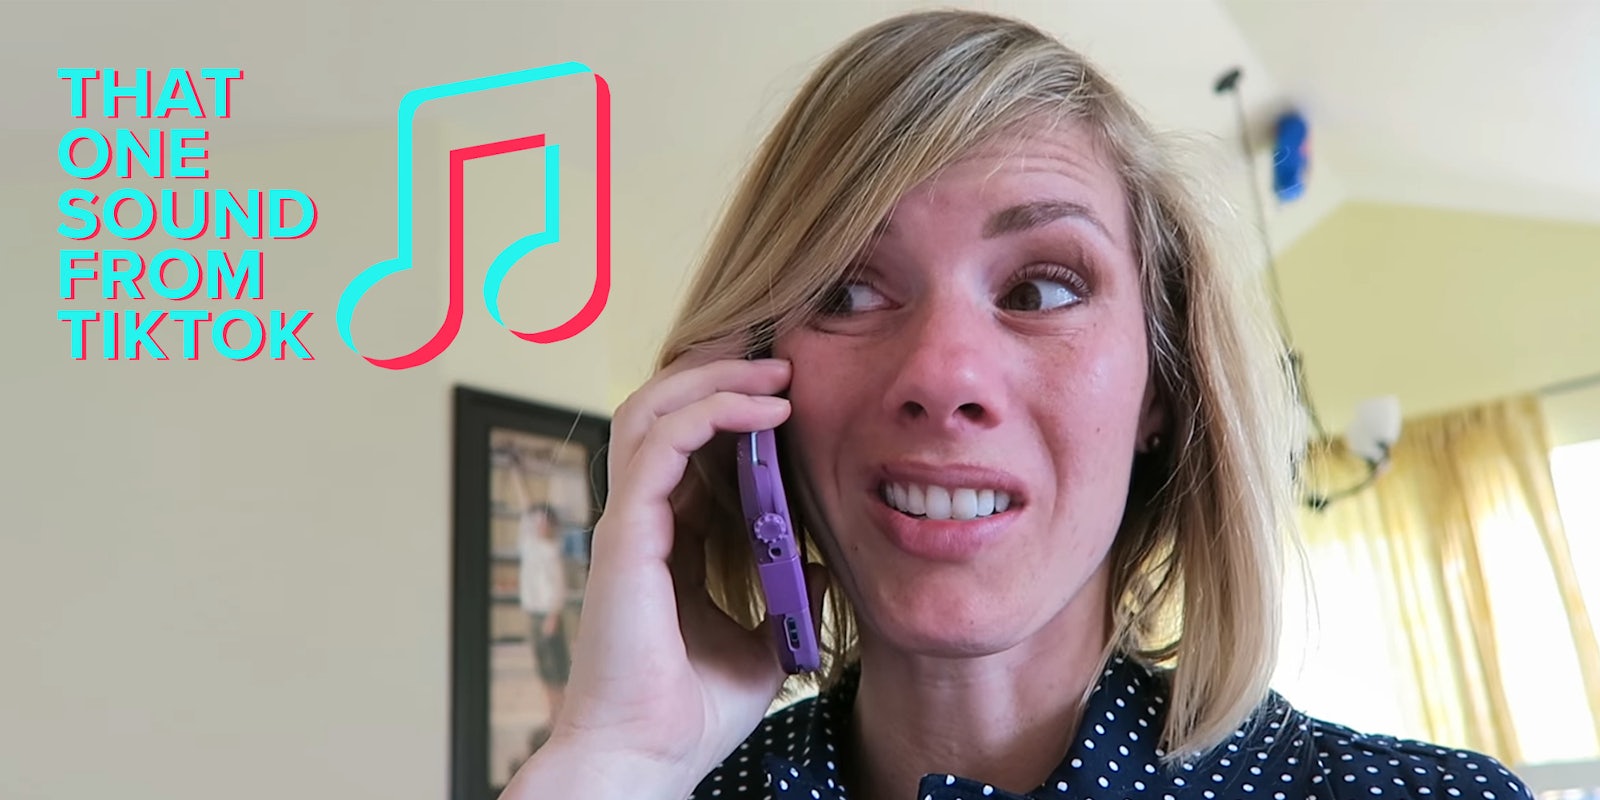 woman on phone with caption 'That one sound from TikTok'